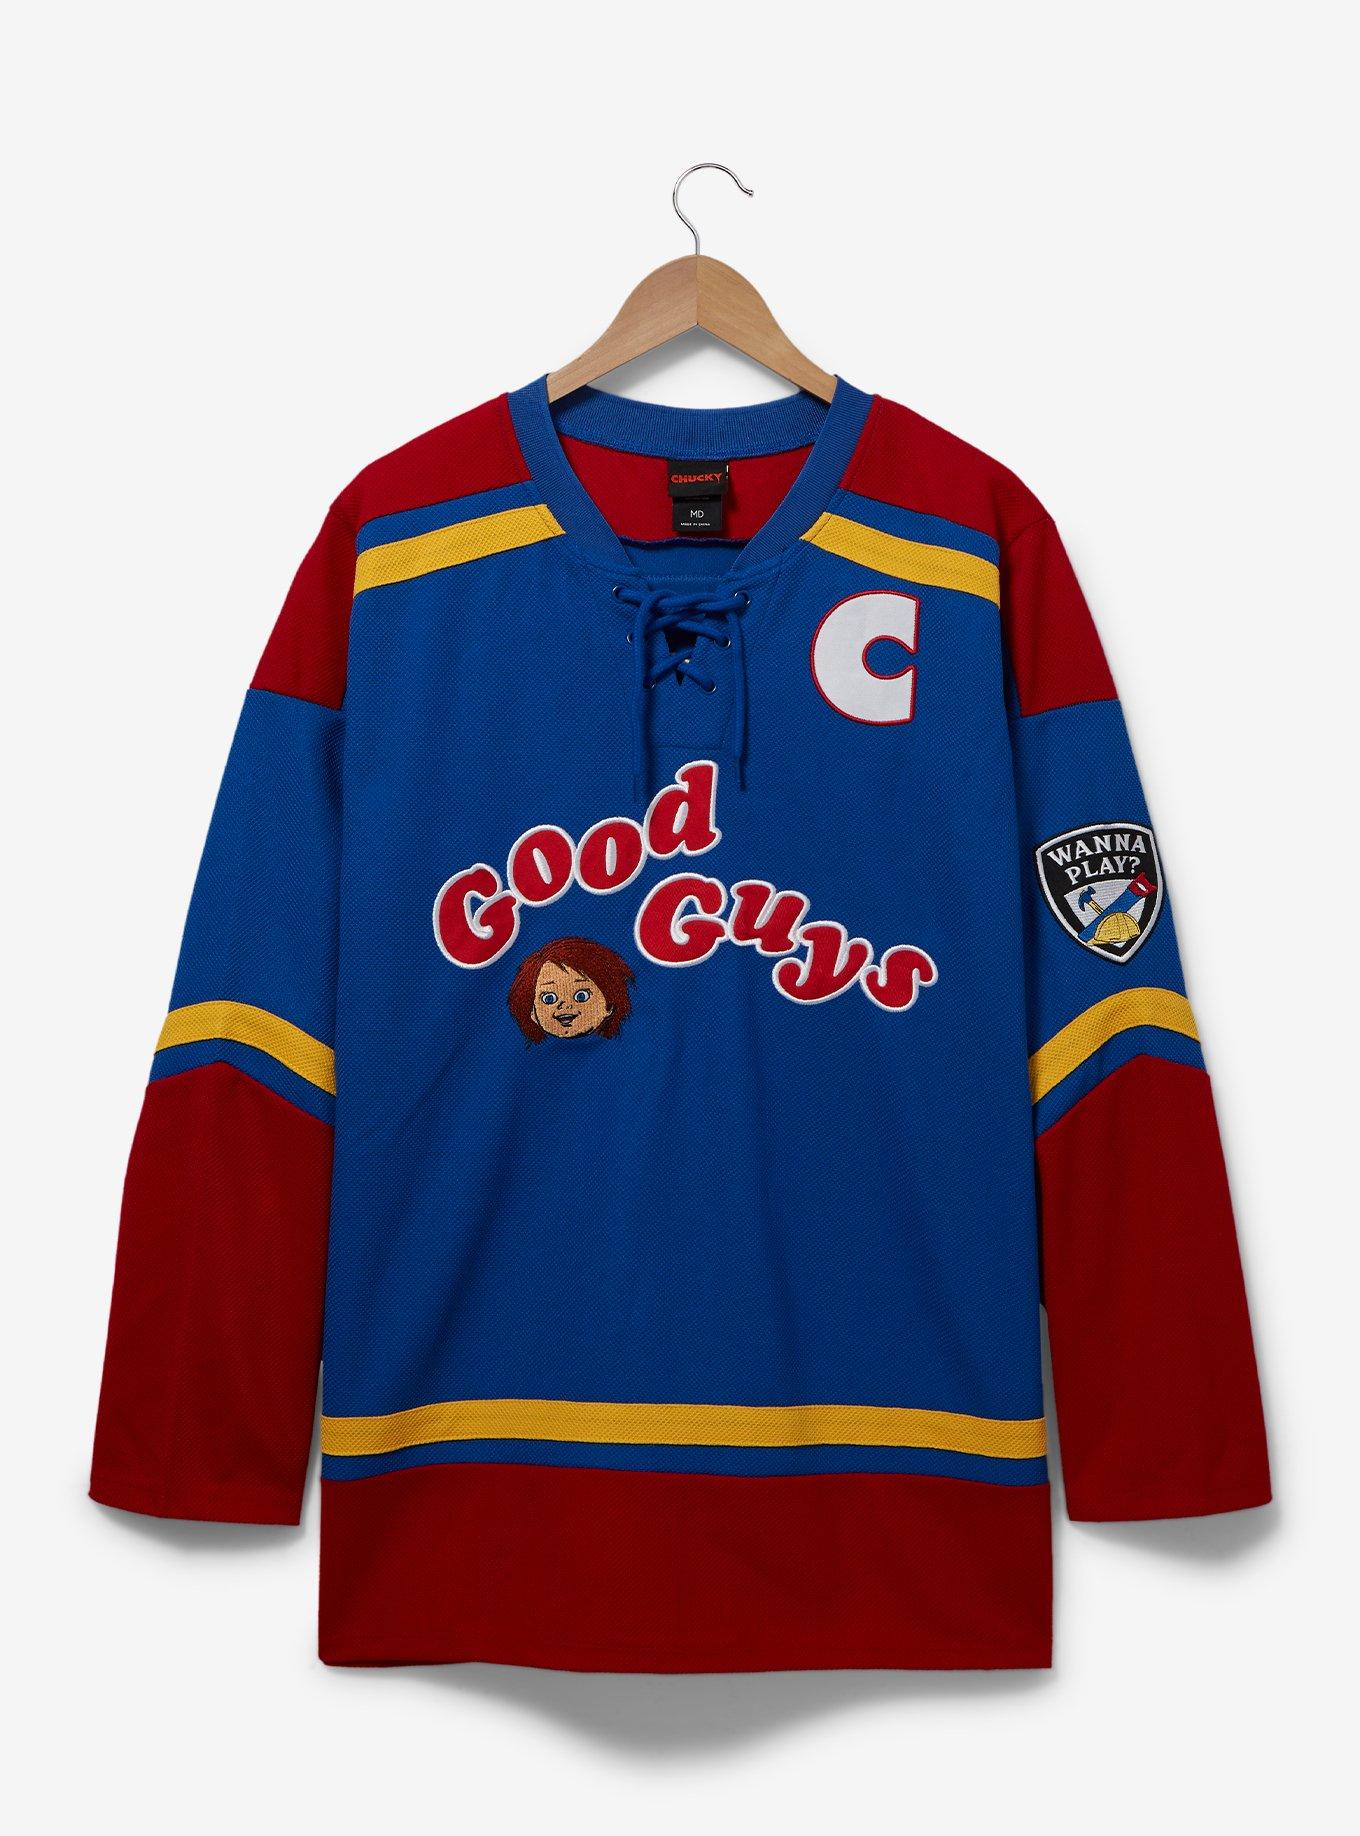 Child's Play Chucky Hockey Jersey - BoxLunch Exclusive